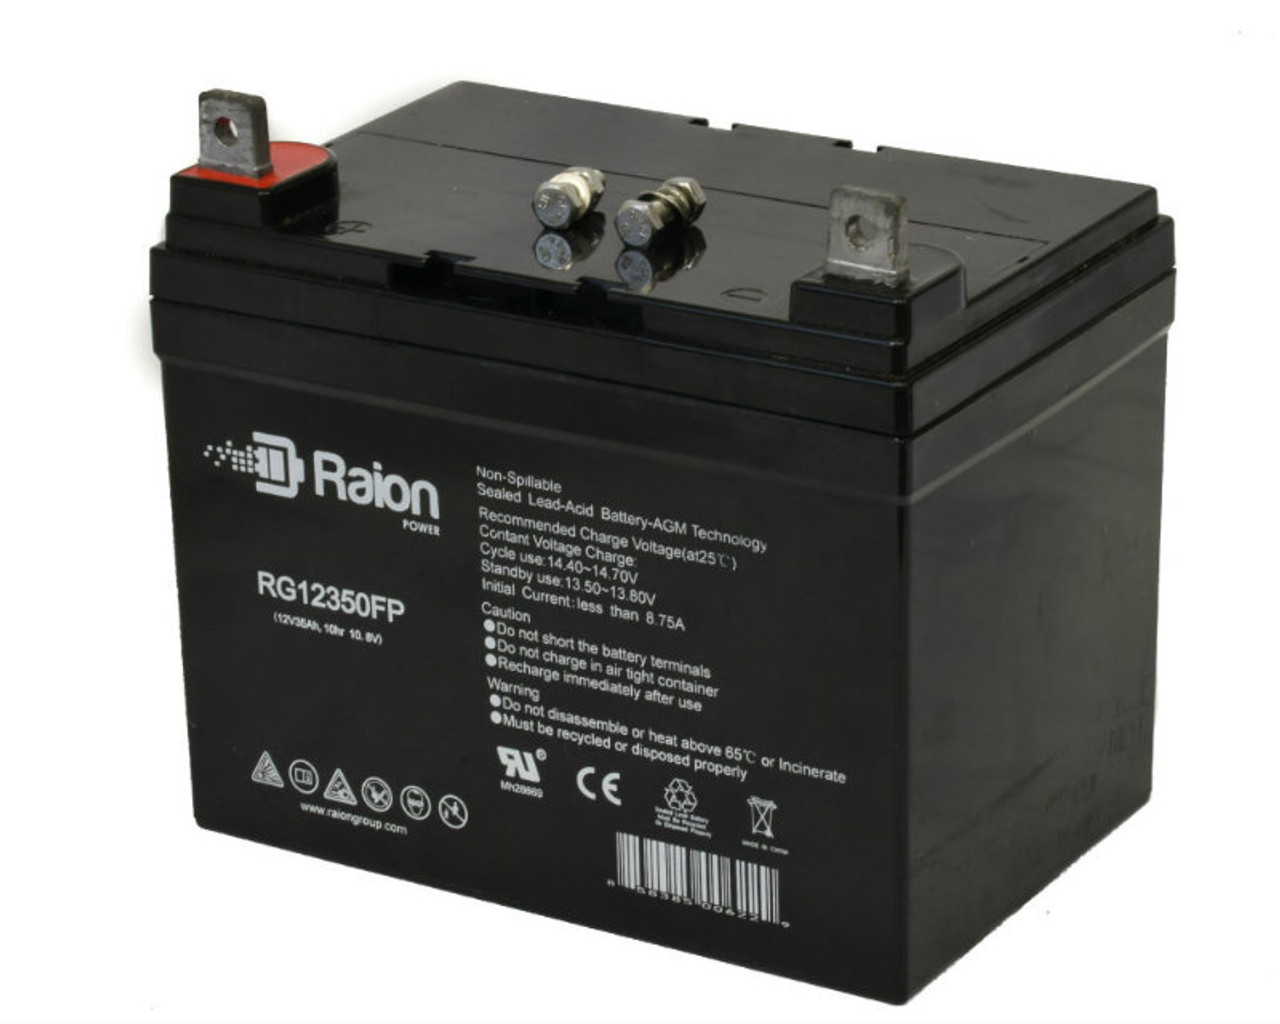 Raion Power Replacement 12V 35Ah RG12350FP Battery for Wheel Horse 11-32